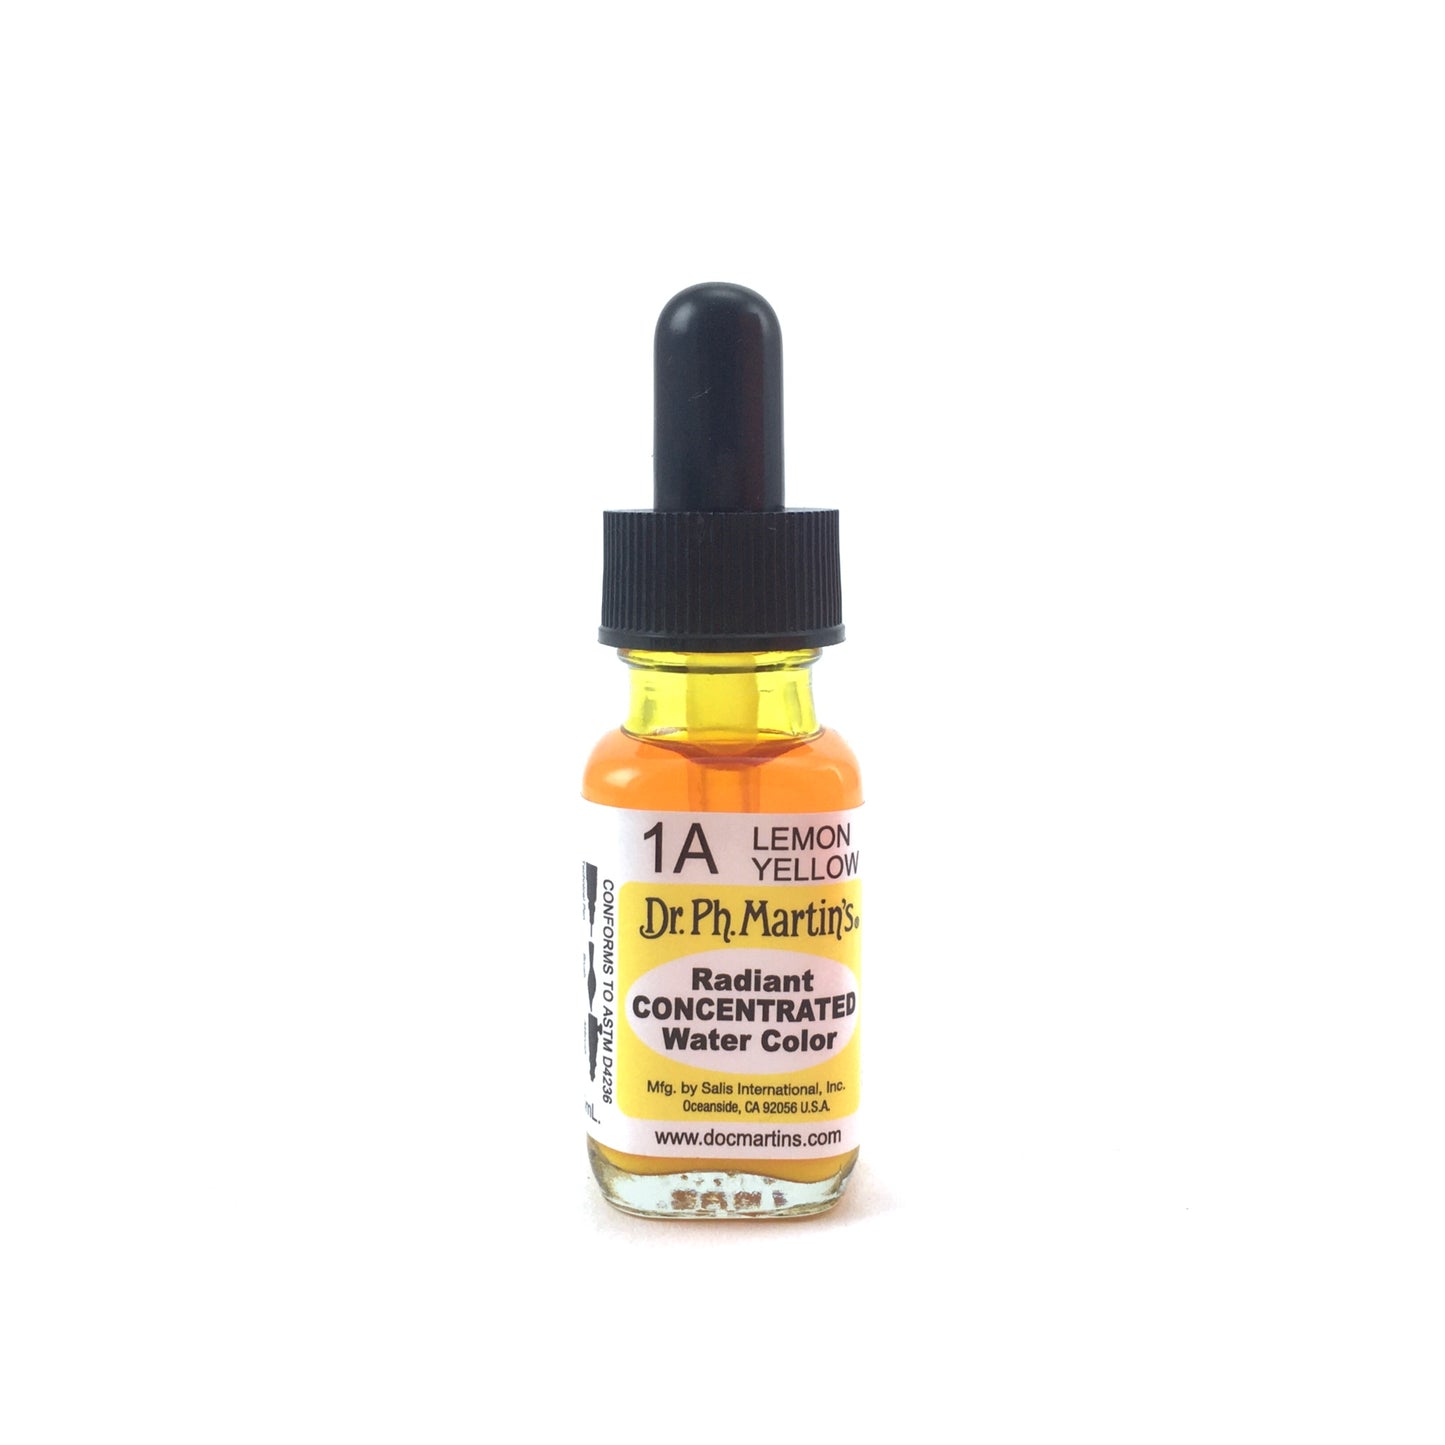 Dr. Ph. Martin's Radiant Concentrated Watercolor - .50 oz. - 1A - Lemon Yellow by Dr. Ph. Martin’s - K. A. Artist Shop